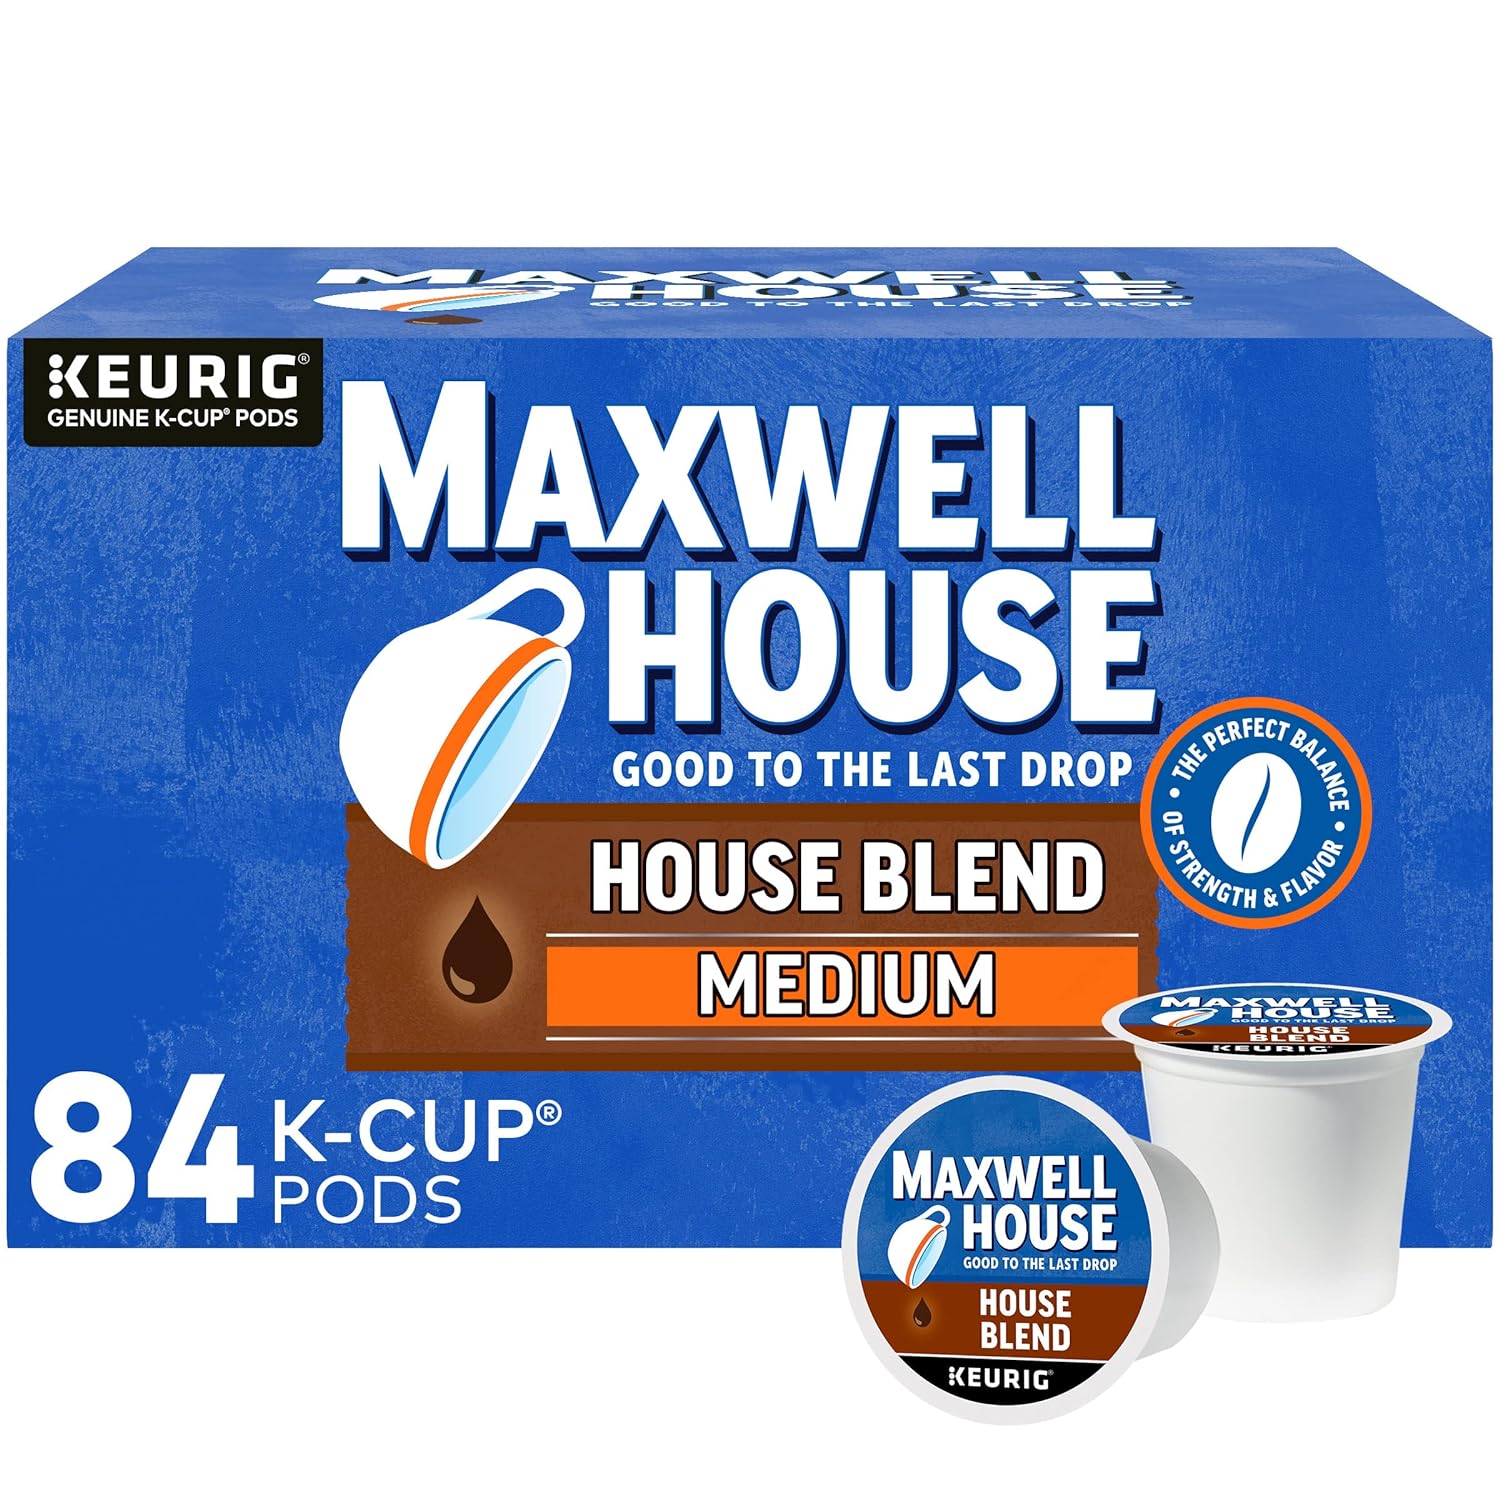 I bring this coffee in to work and it is the most used, a lot of other pods just sit there while the Maxwell pods are always running out. Great cup of coffee every time and it is the best value per pod. It has a great taste, not bitter but strong enough to get through a day.